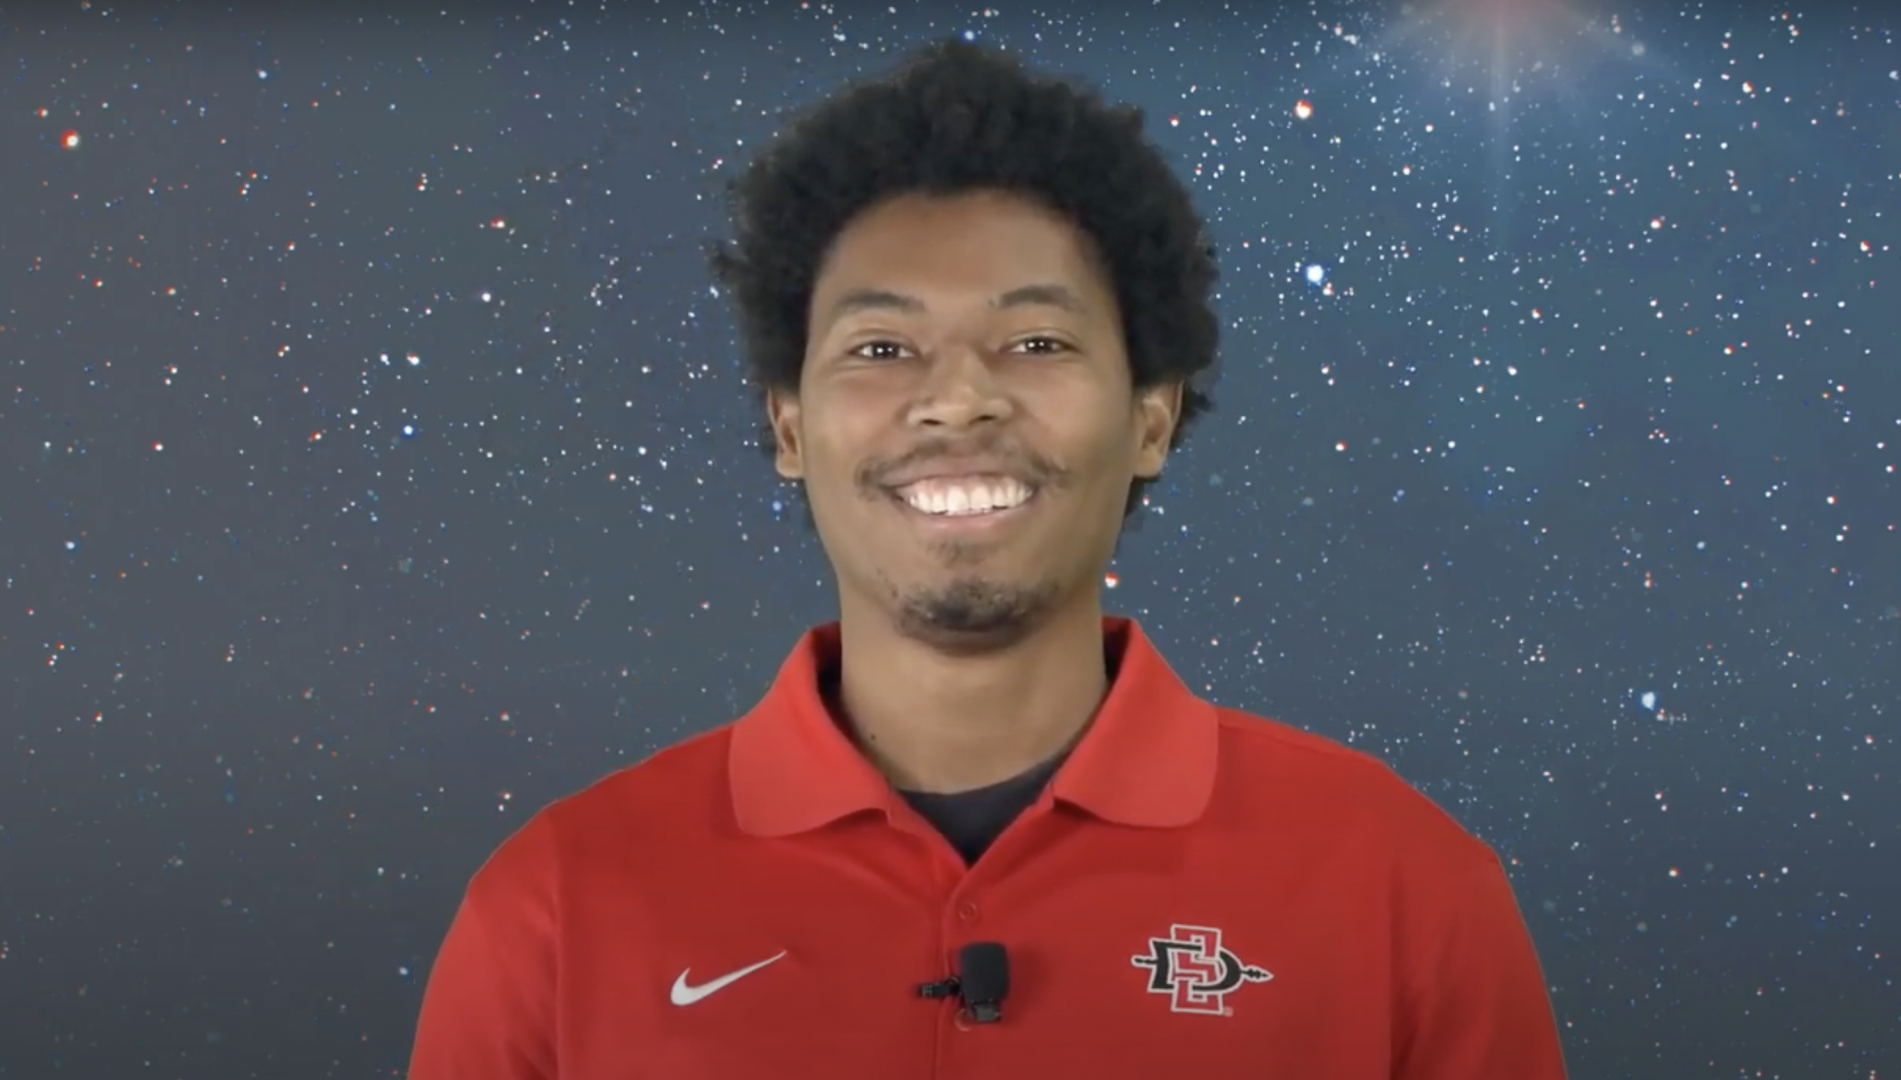 A young man in a red polo shirt smiles in front of a starry virtual background